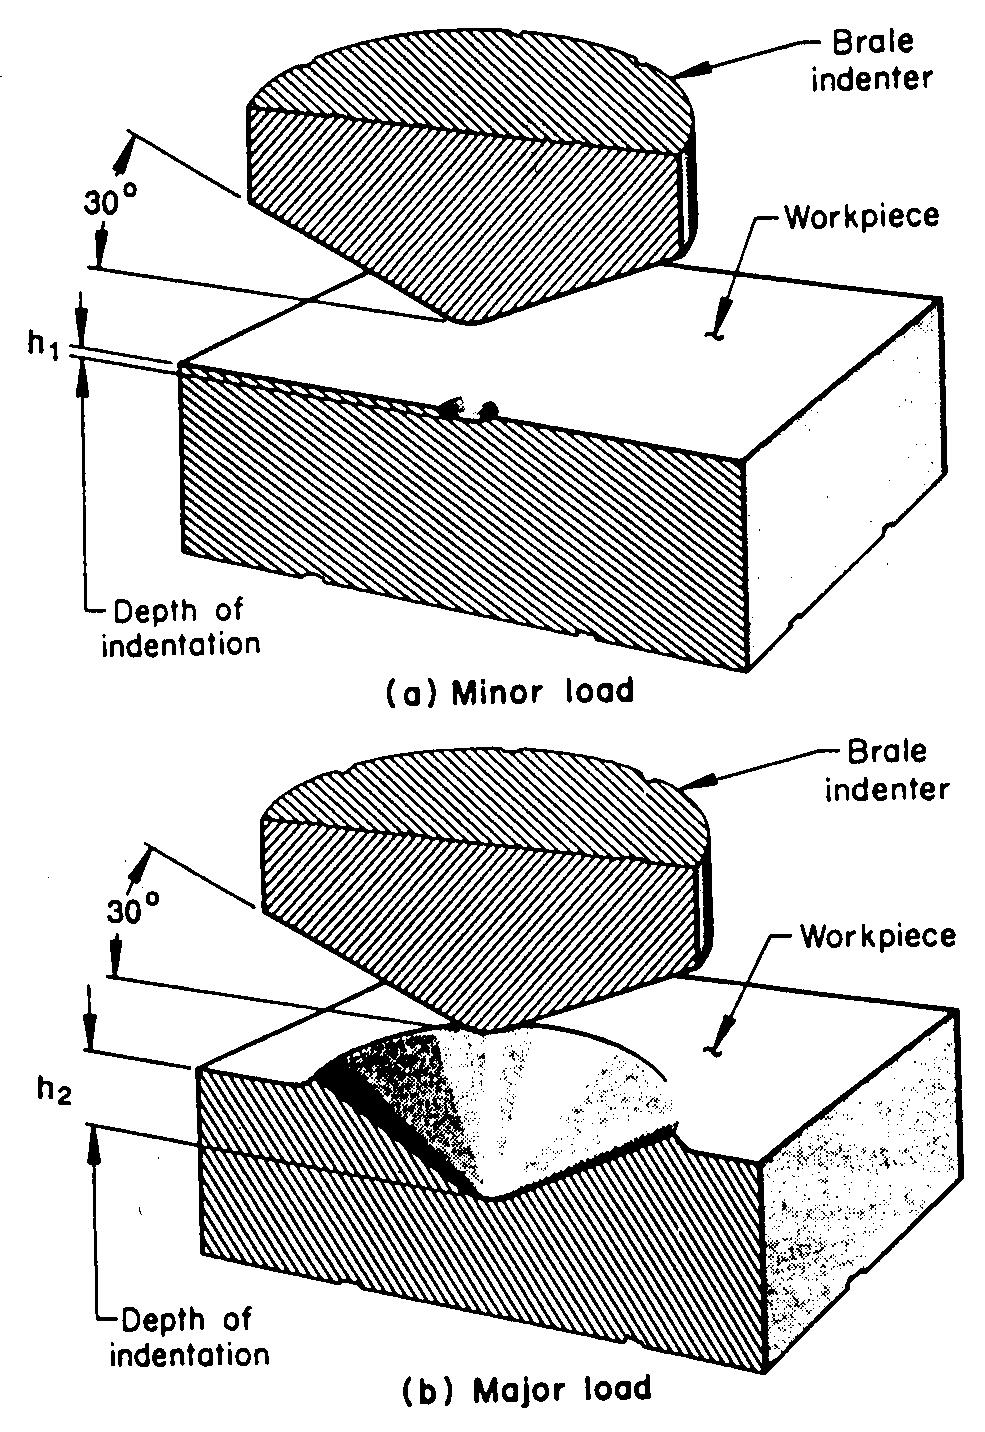 Figure 5.8 Rockwell hardness indentation for a minor load and for a major load.